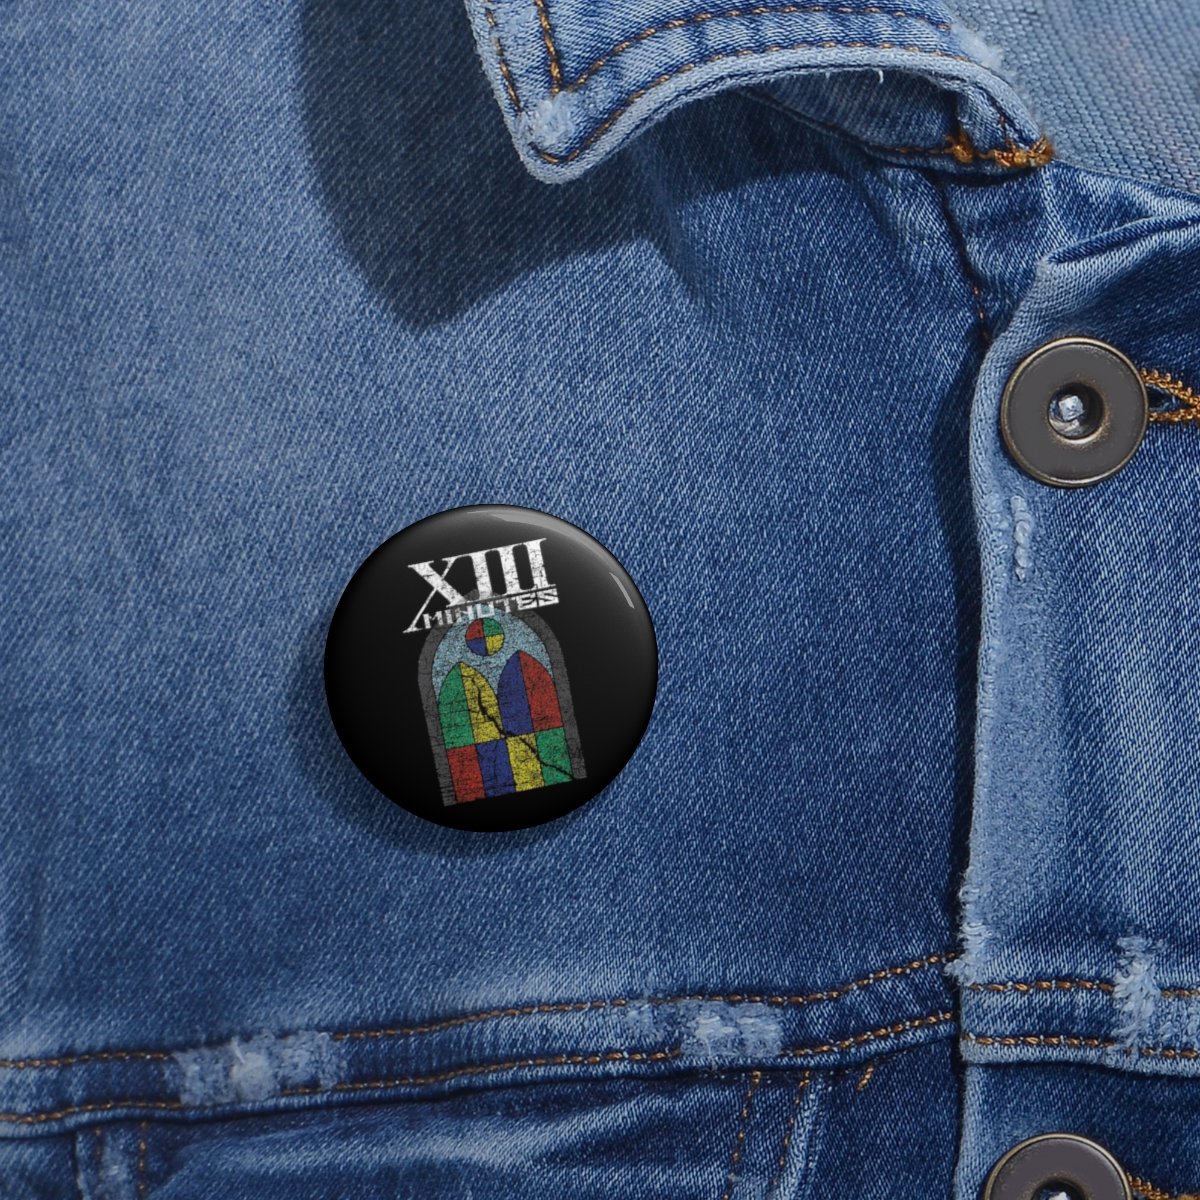 Pin on XIII